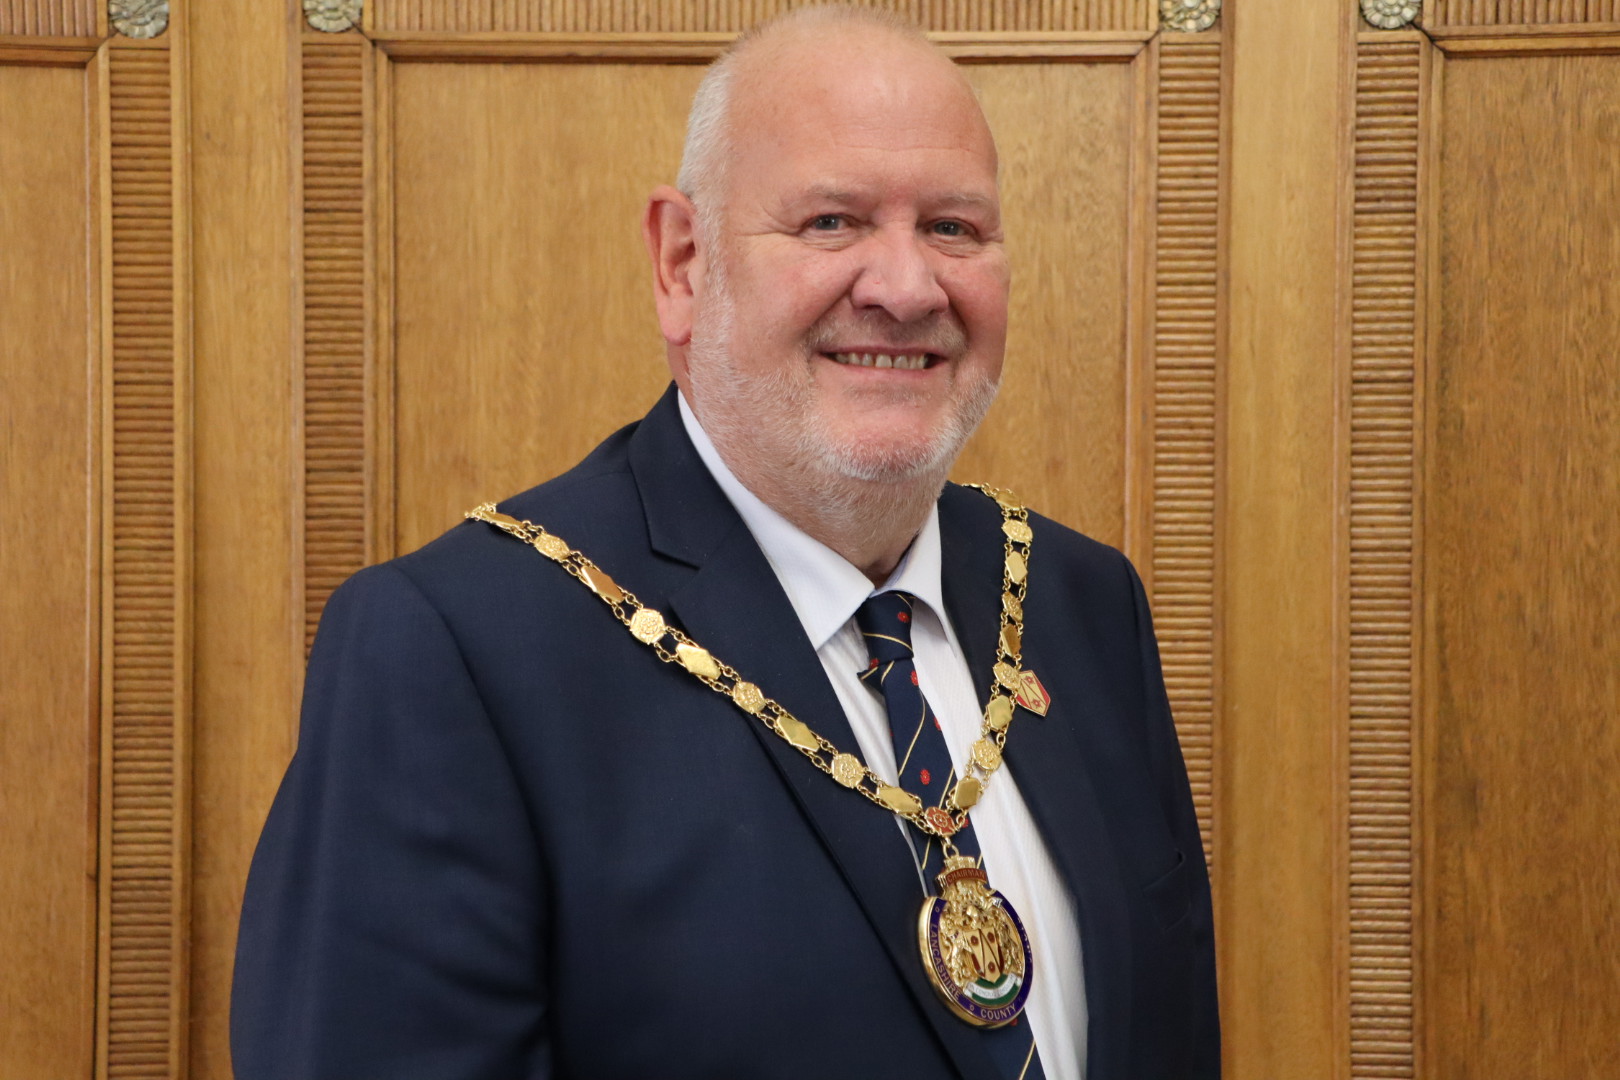 Chairman of Lancashire County Council - Alan Cullens